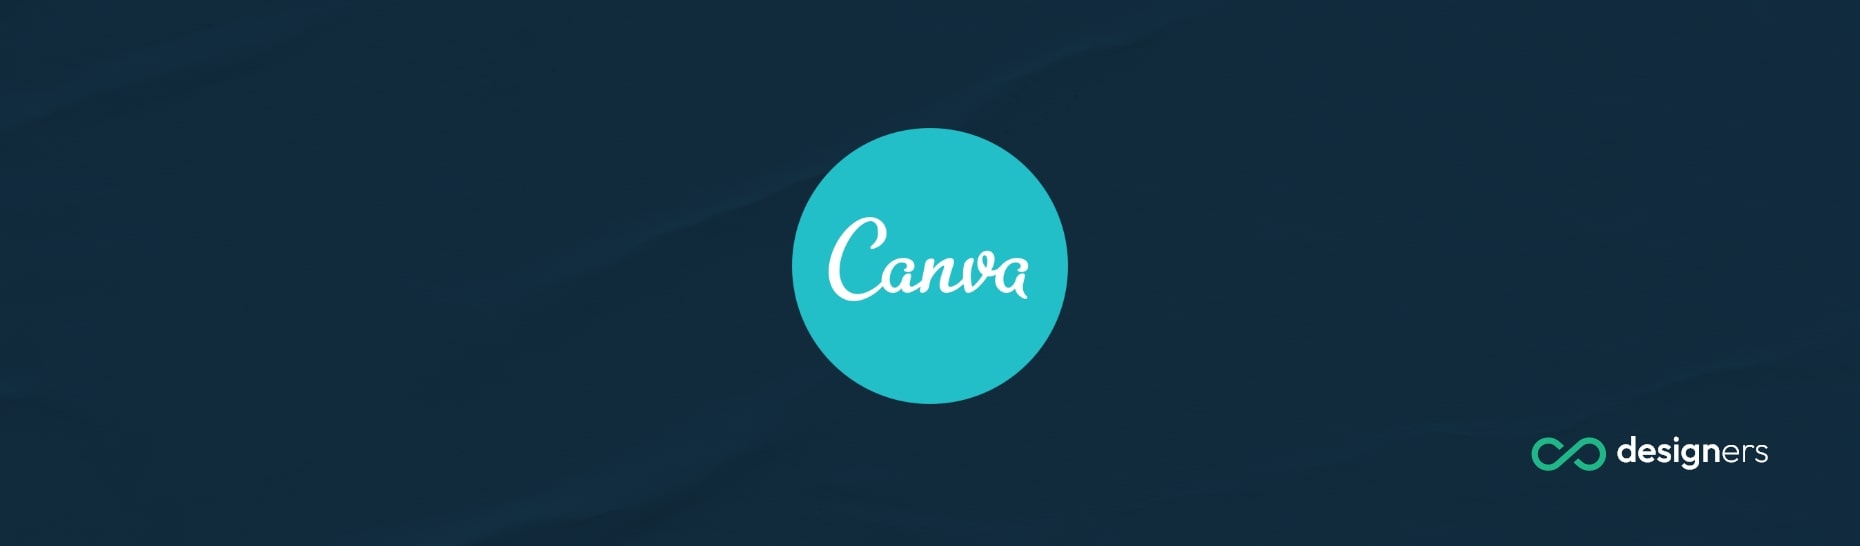 What Are Canva Shares Worth?